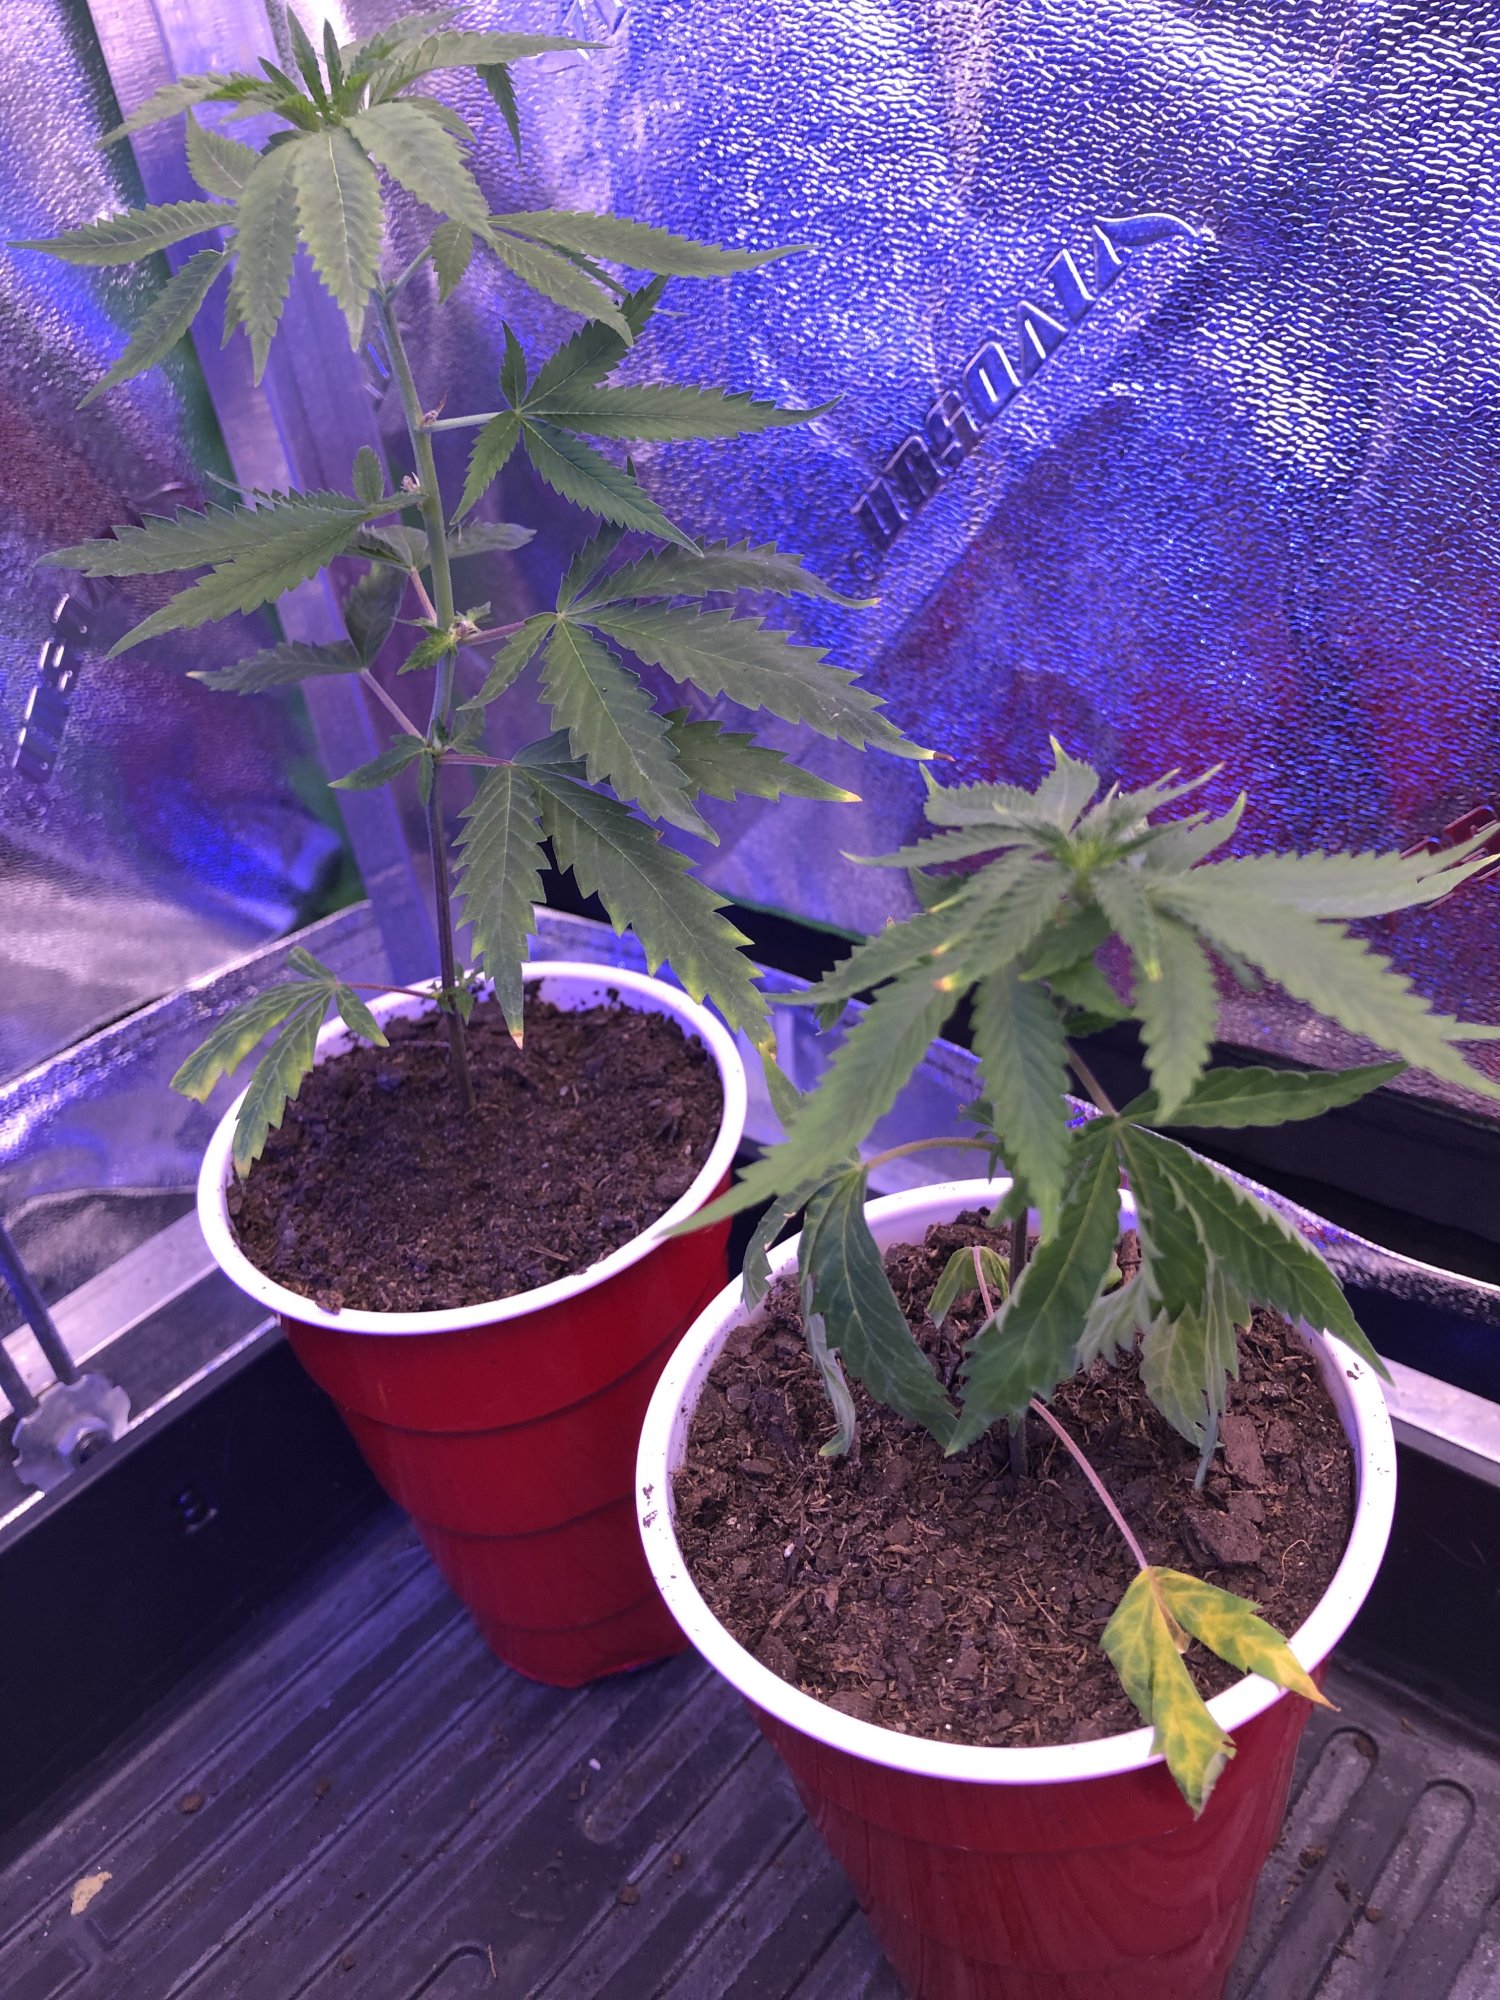 Cloning and nute burn 10